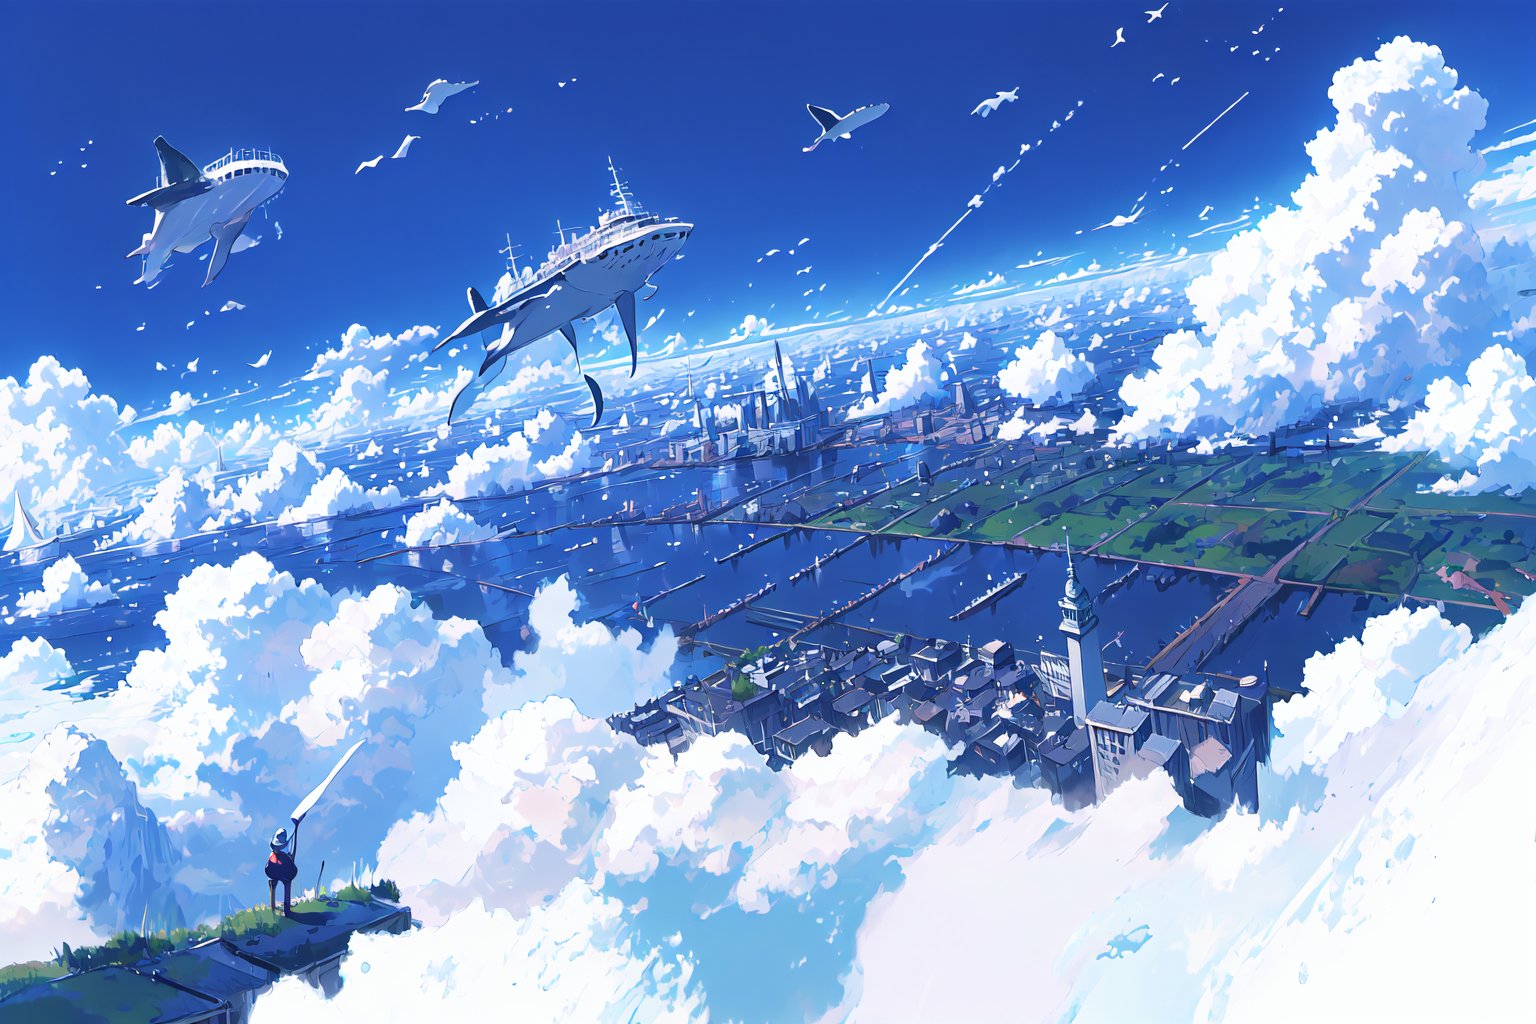  above the clouds , distant, flying whales,flying ships